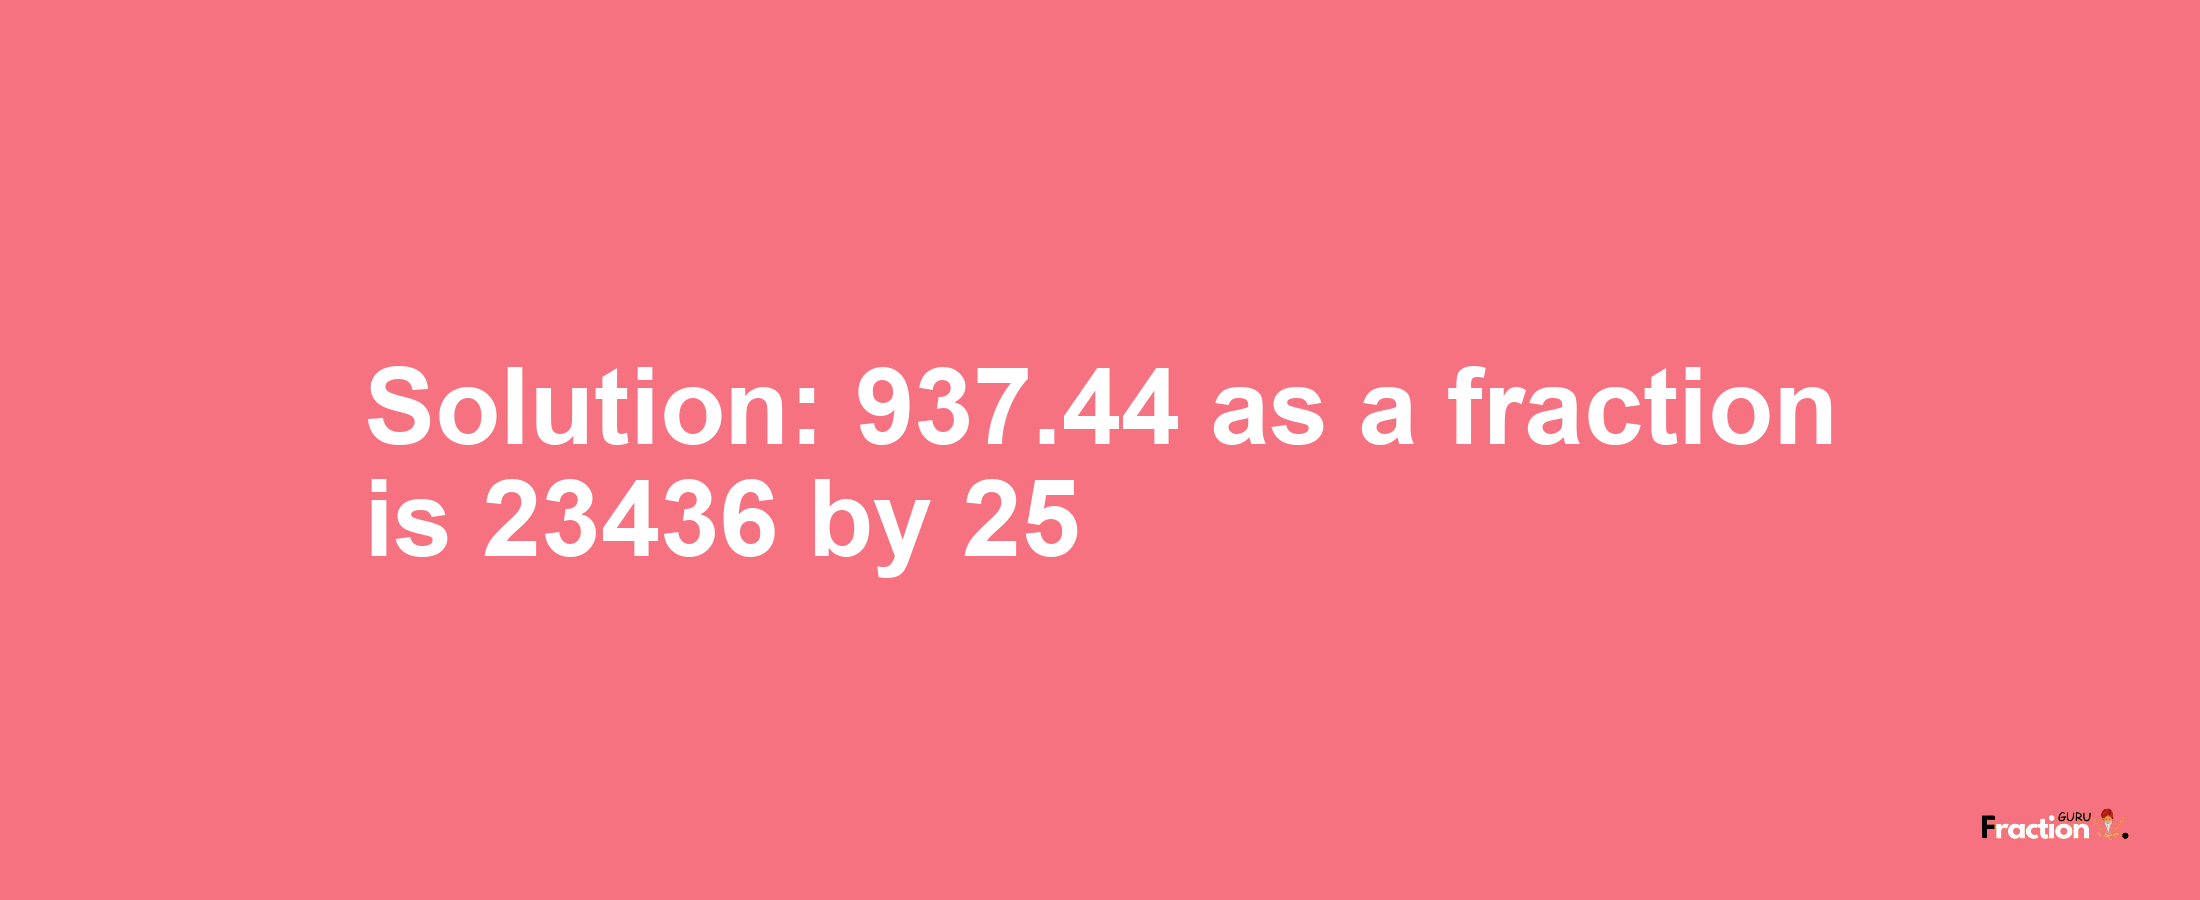 Solution:937.44 as a fraction is 23436/25